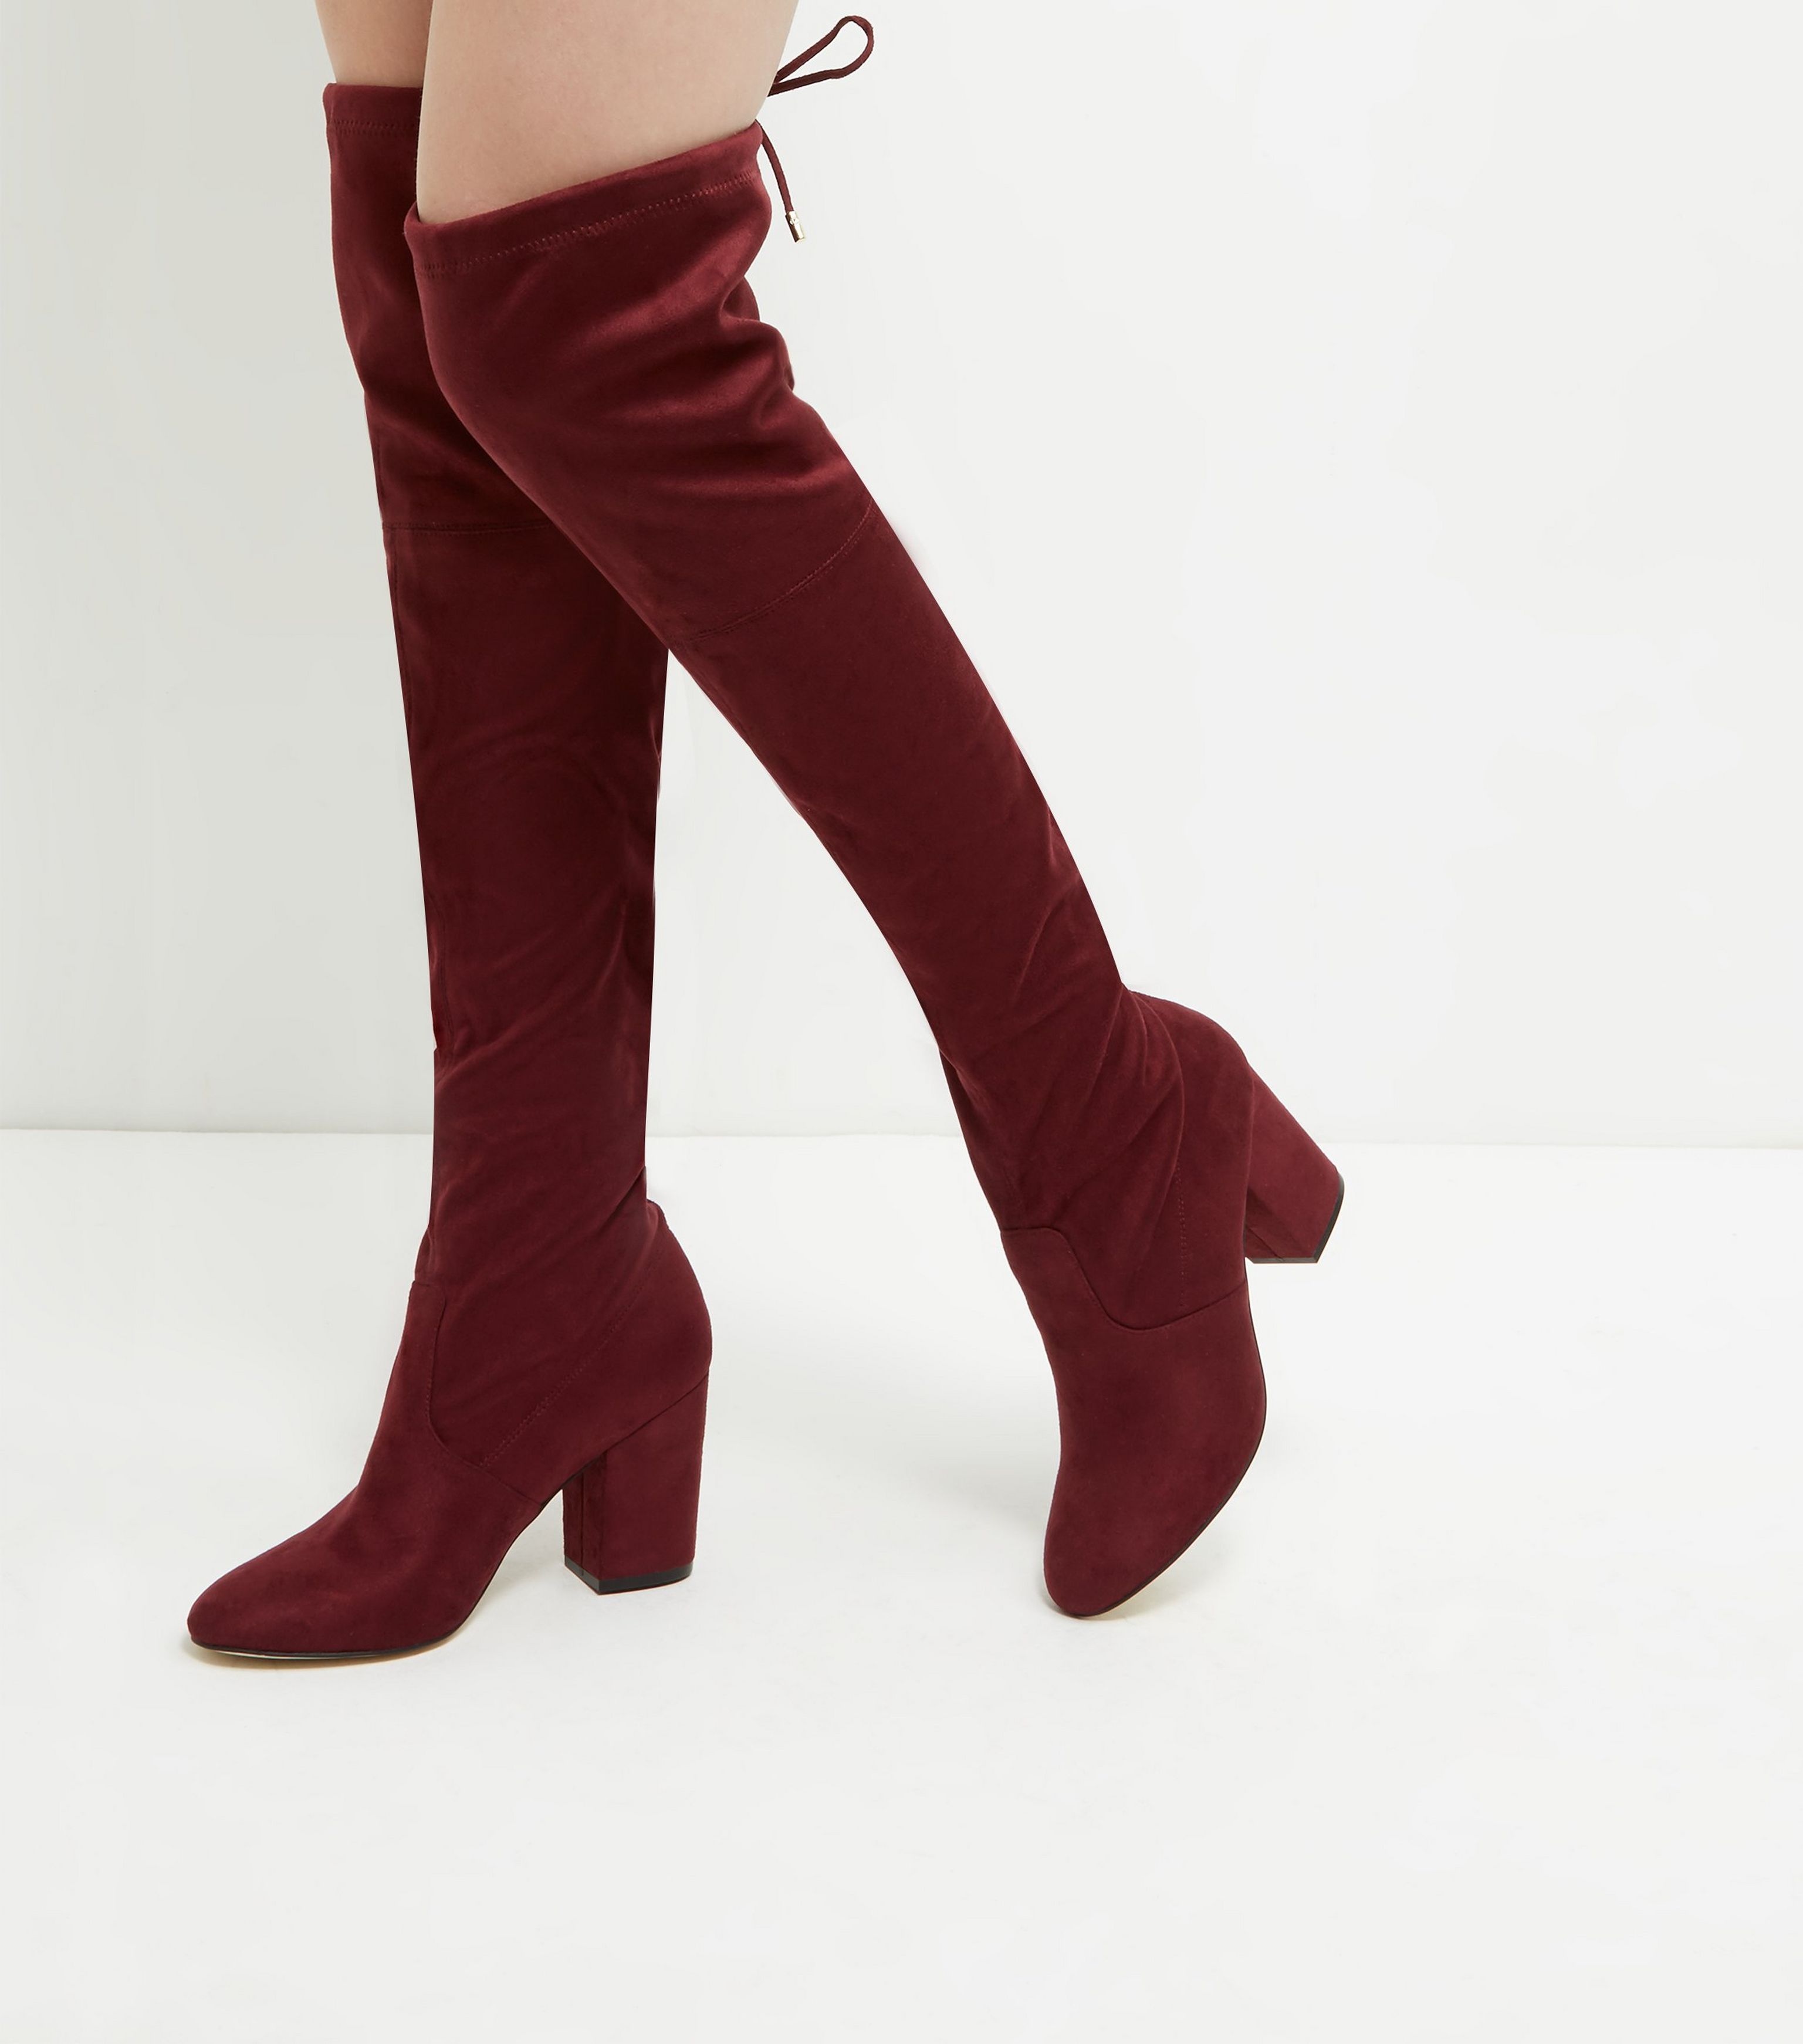 dark-red-suedette-tie-back-over-the-knee-boots